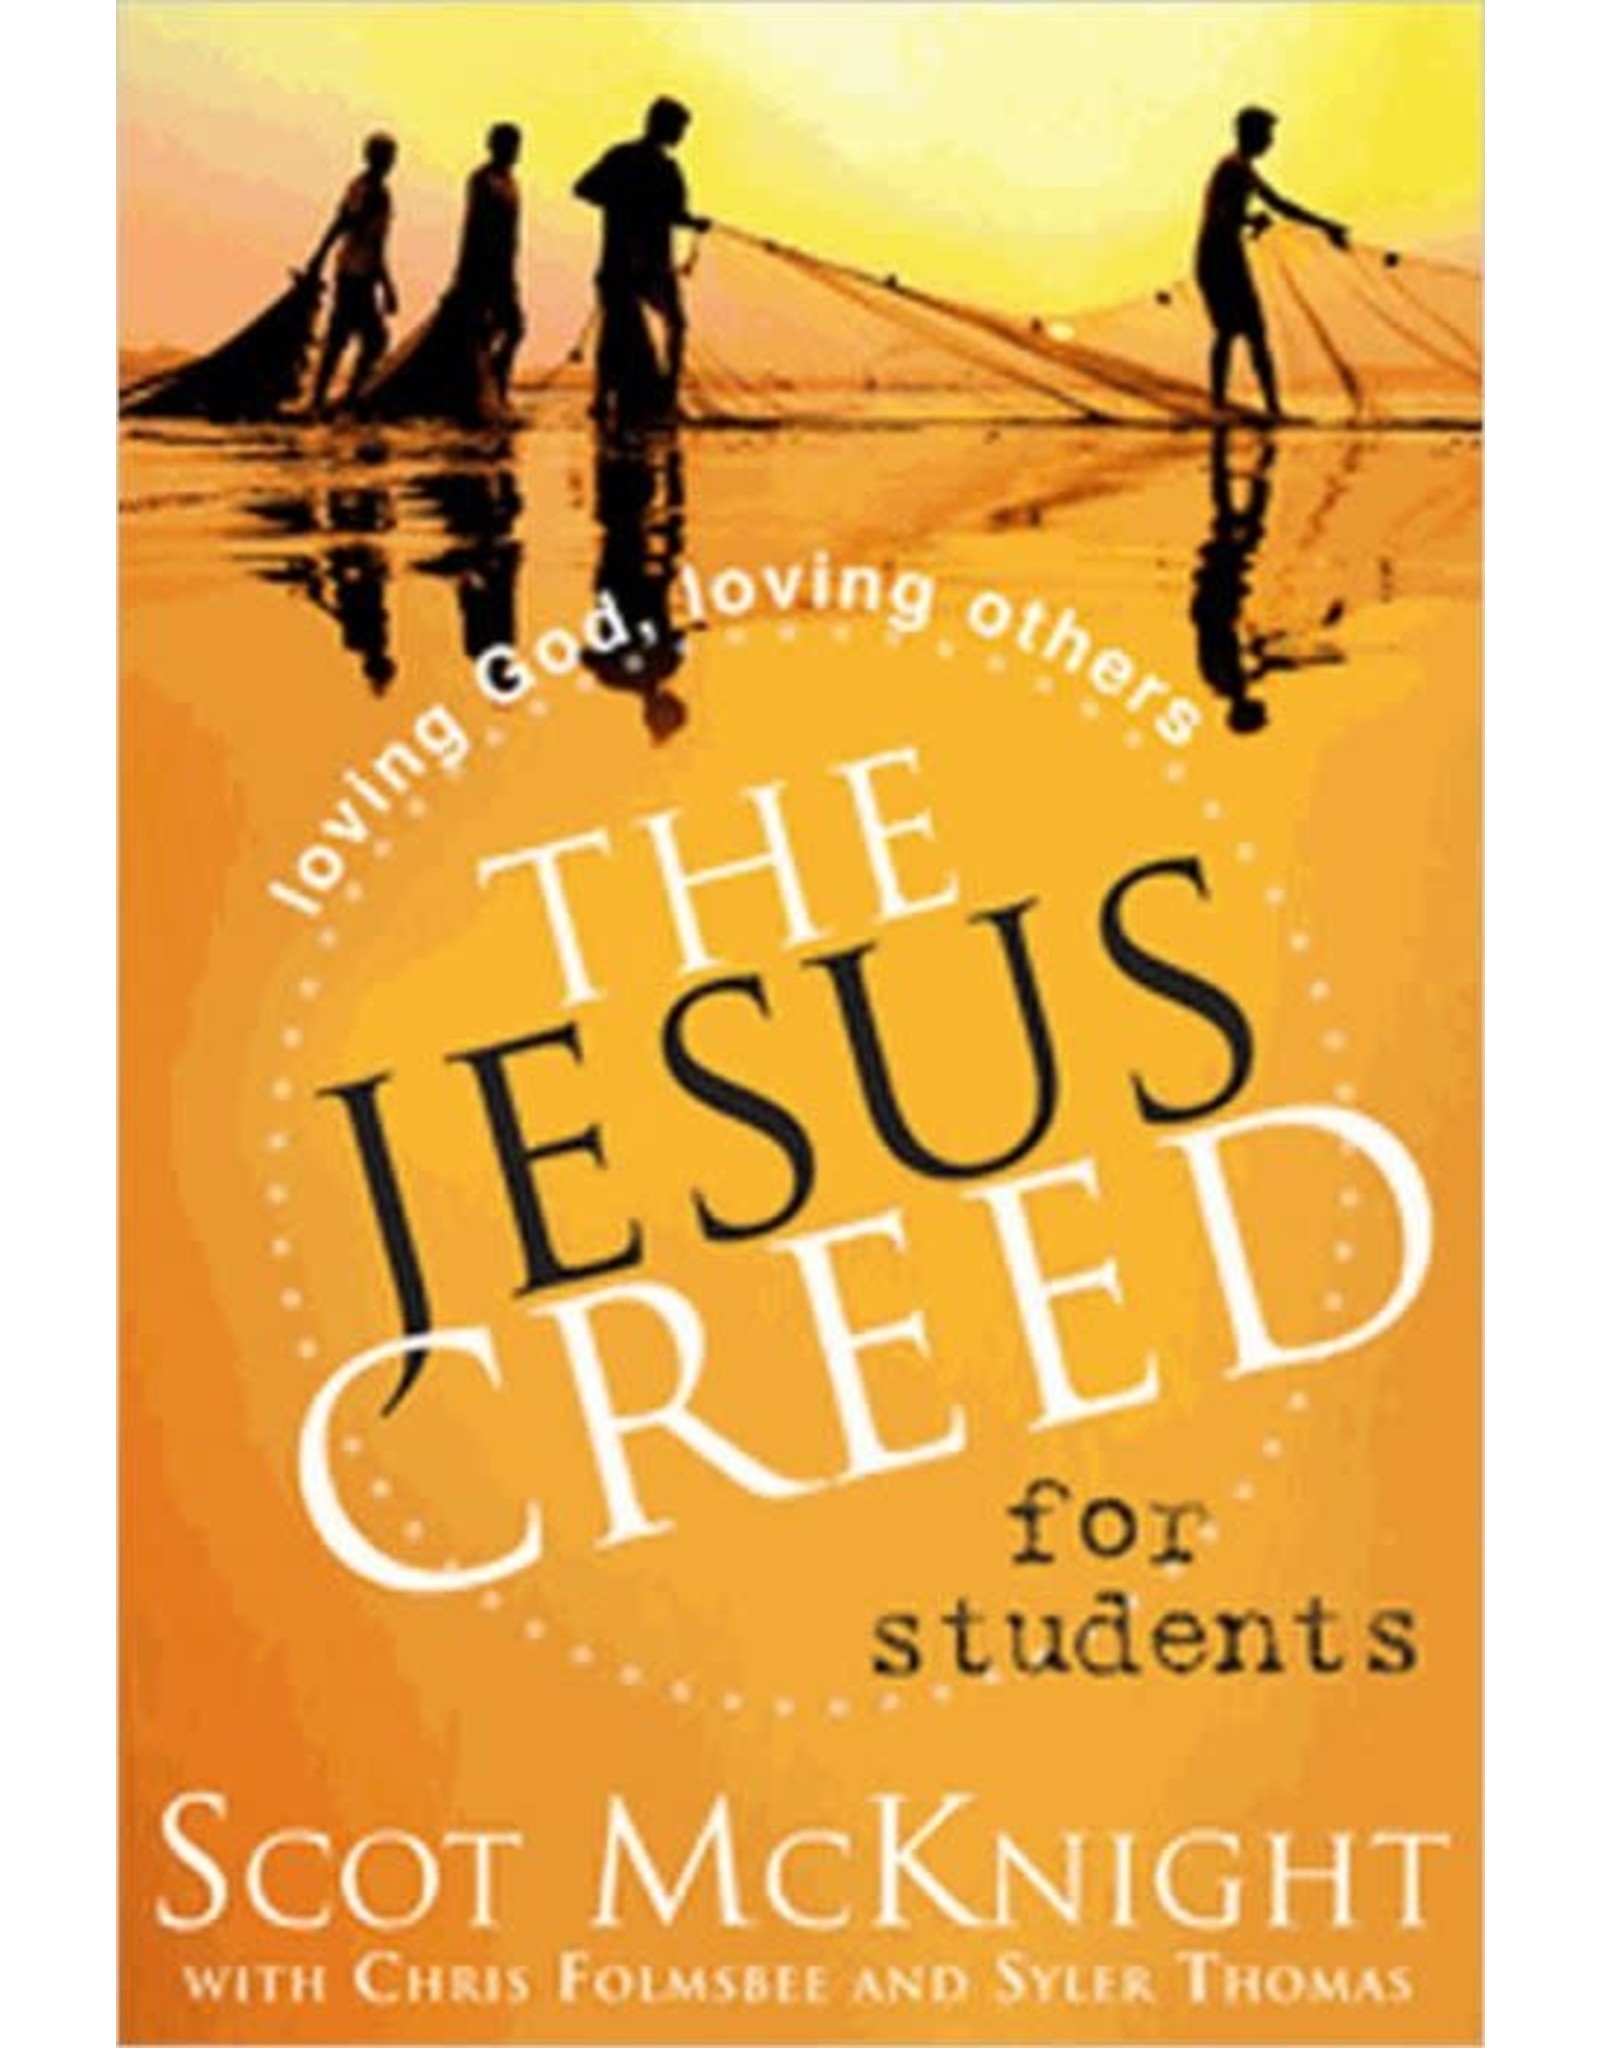 Paraclete Press The Jesus Creed for Students: Loving God, Loving Others by Scot McKnight (Paperback)